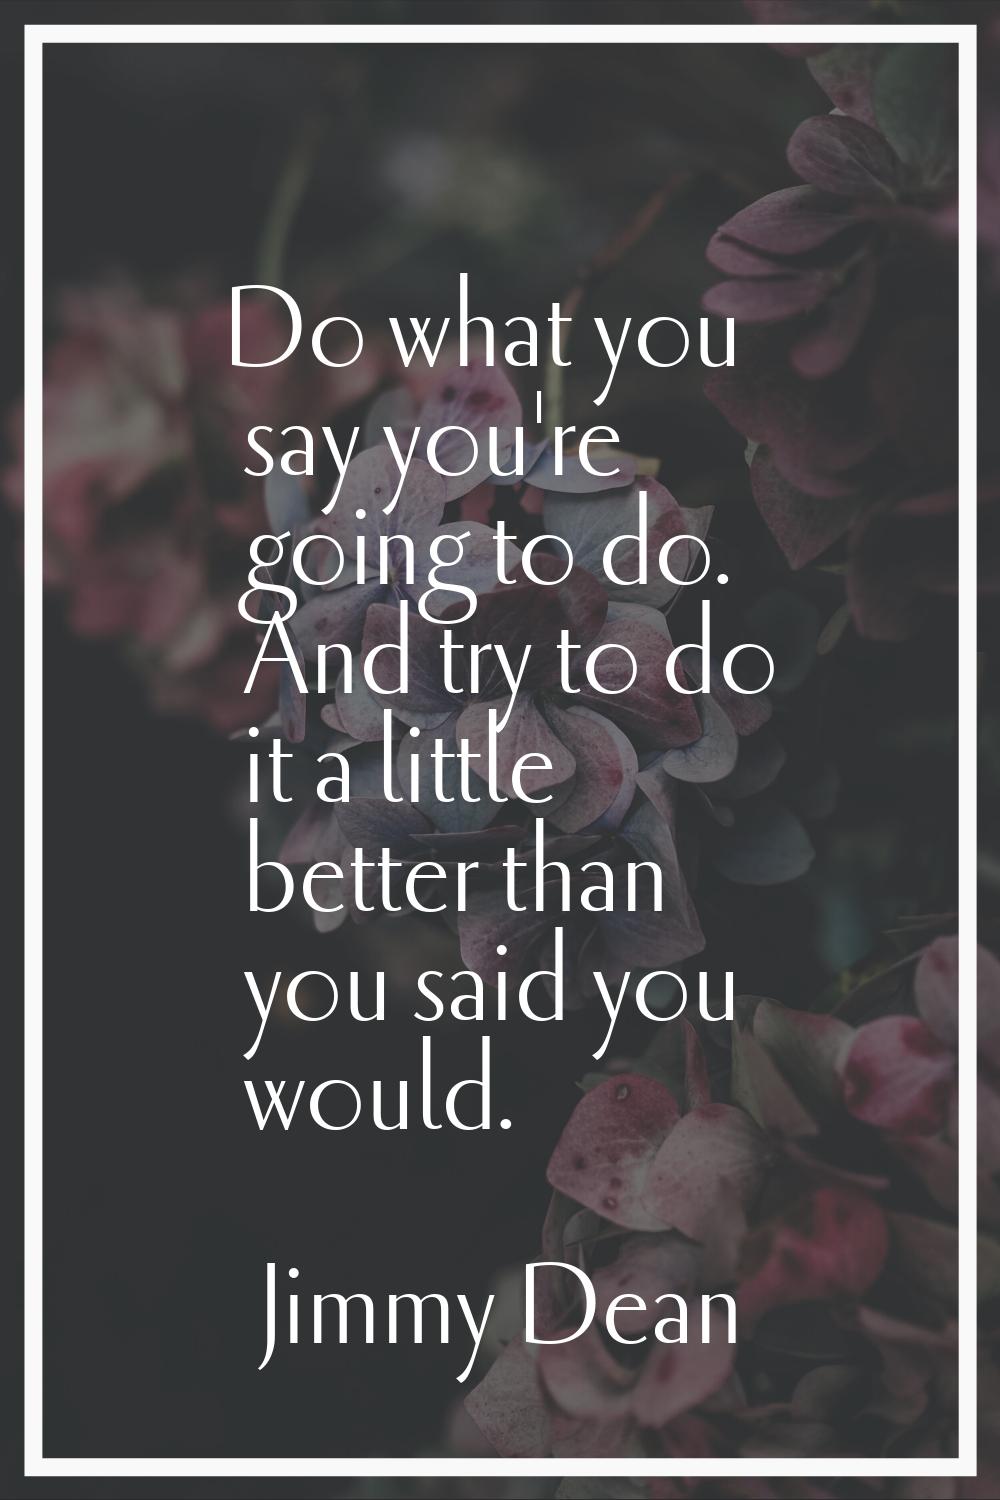 Do what you say you're going to do. And try to do it a little better than you said you would.